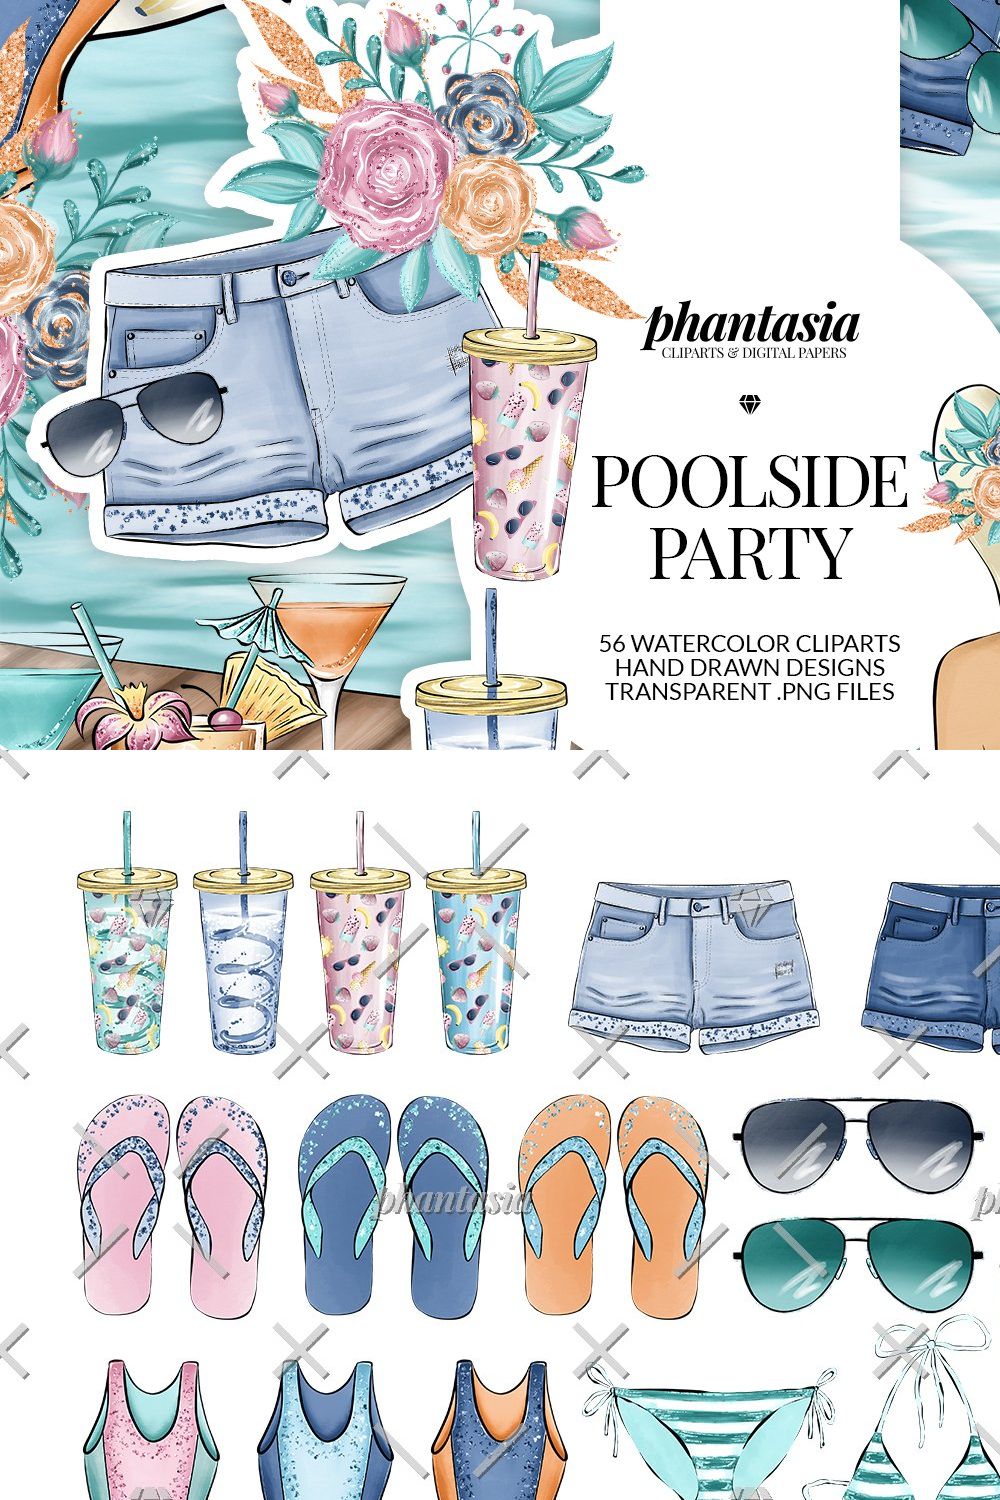 Poolside Watercolor Cliparts pinterest preview image.